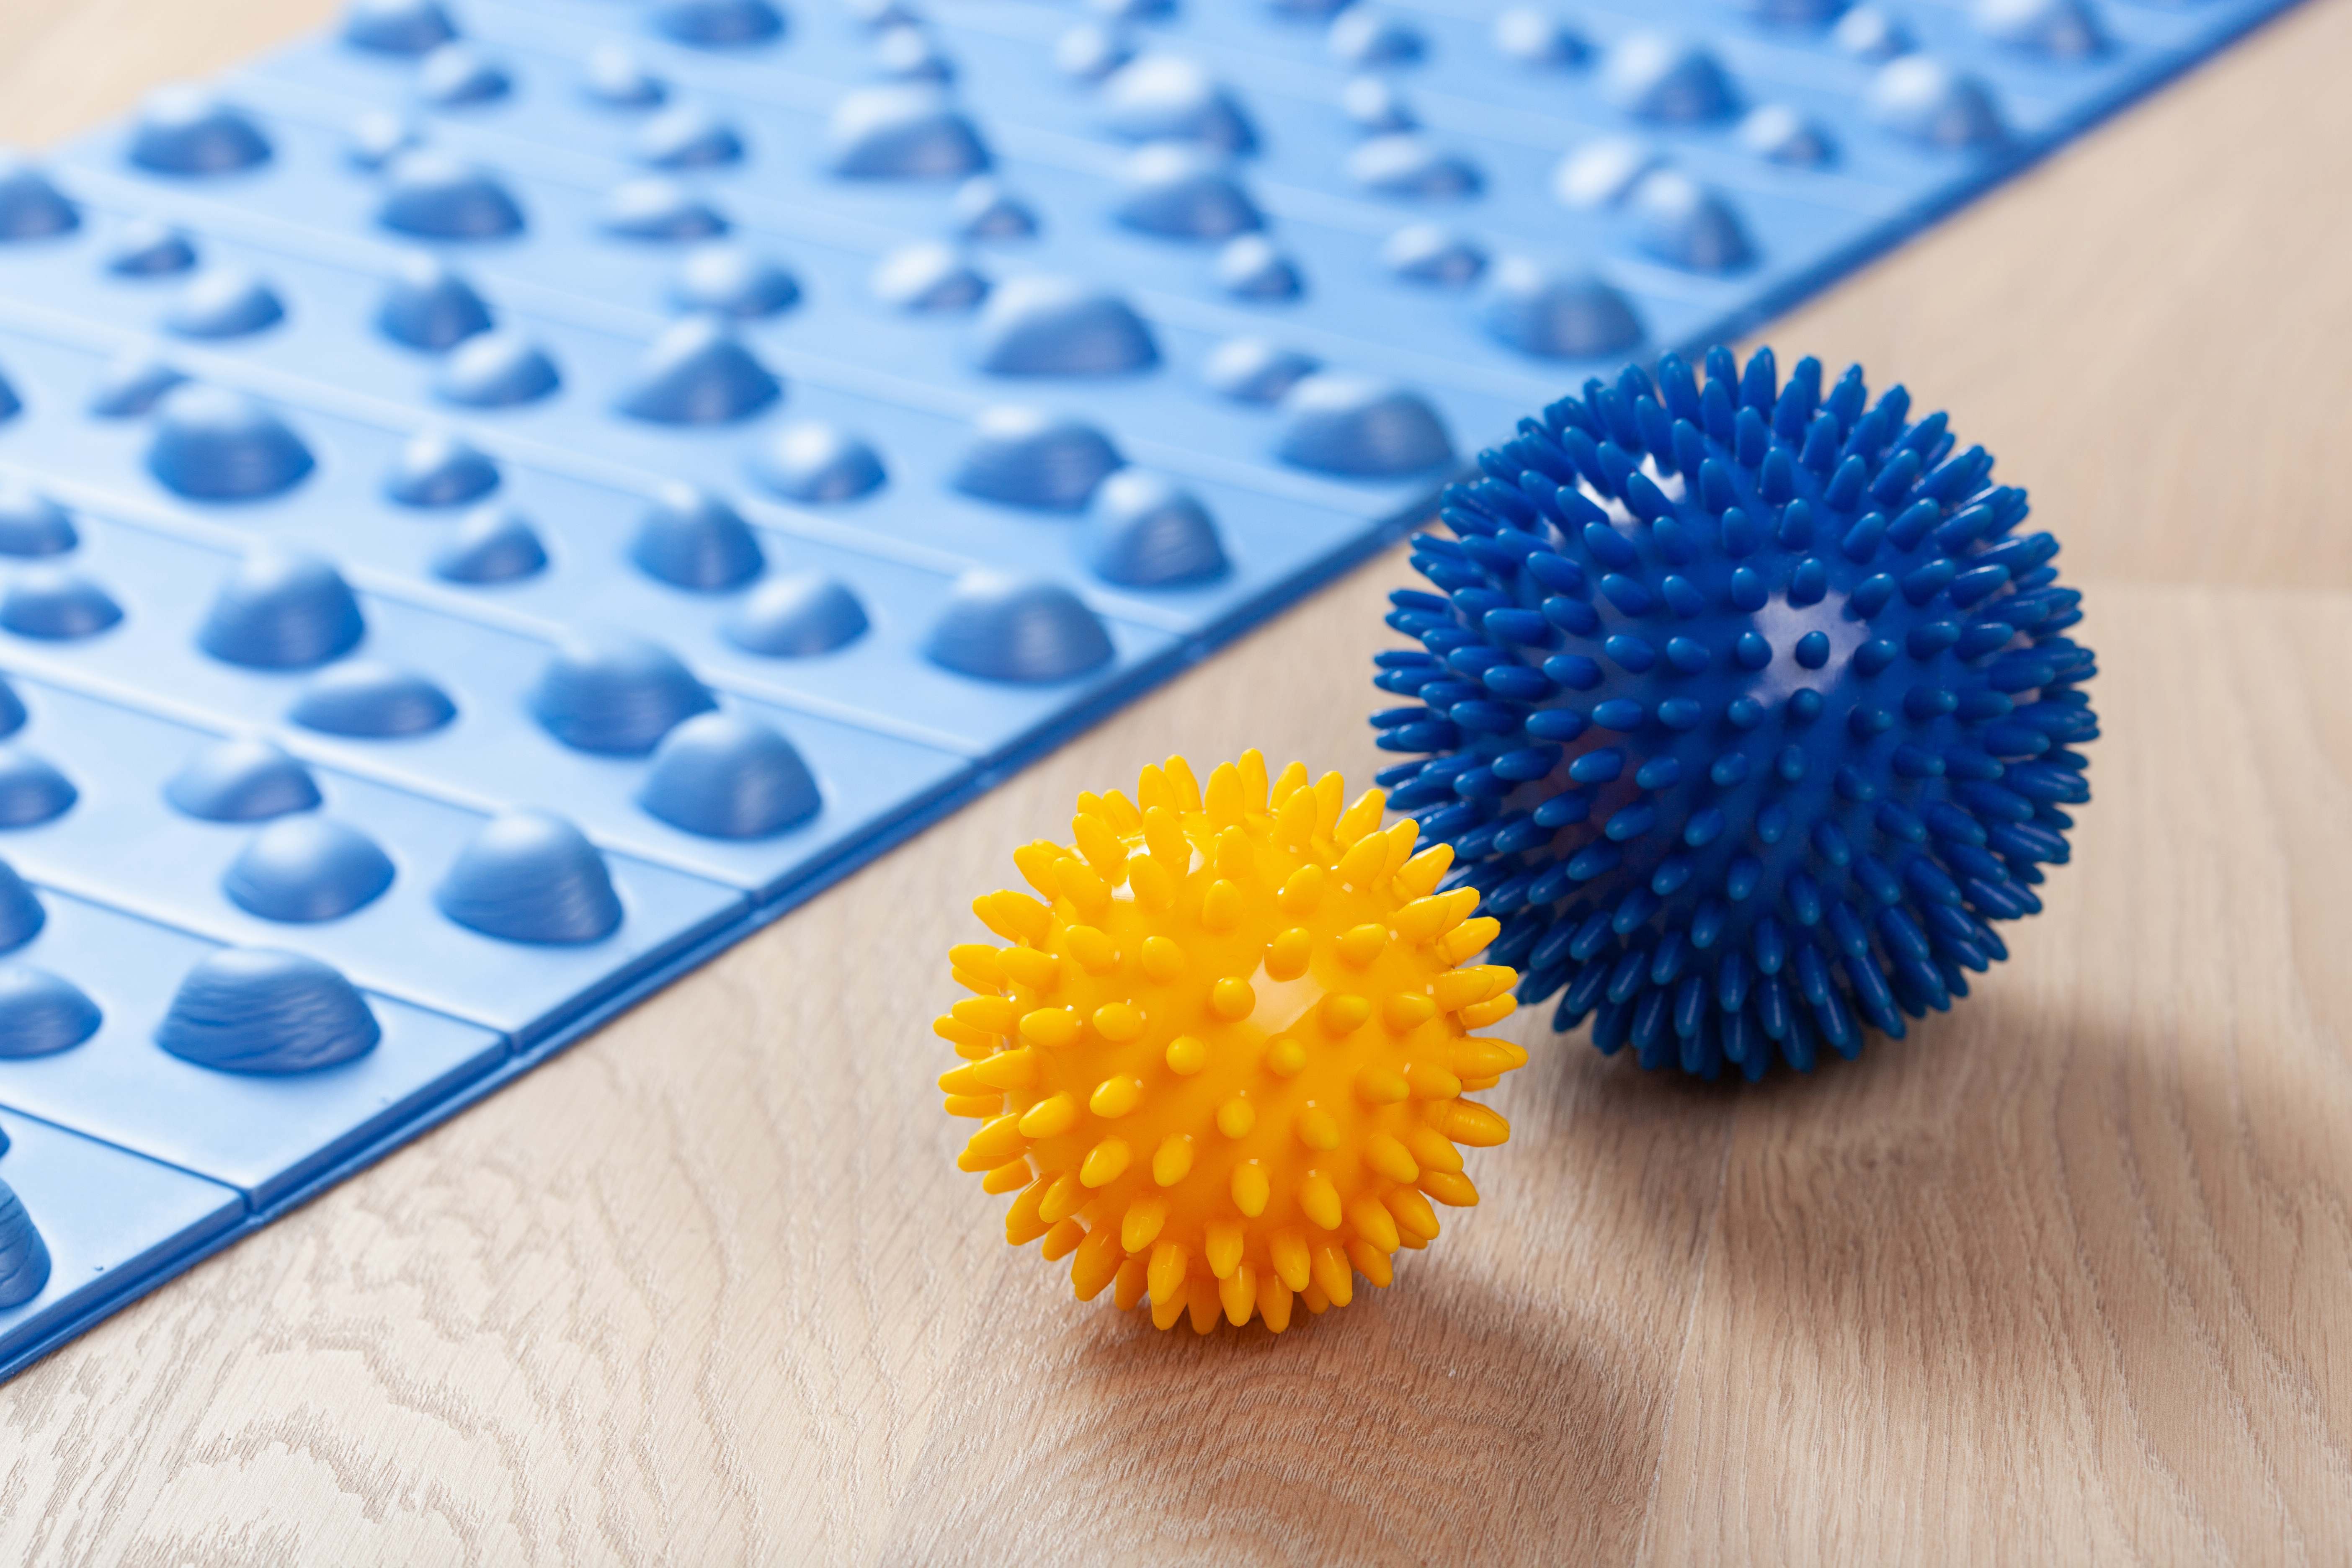 A pair of massage balls for soothing sore muscles at home.